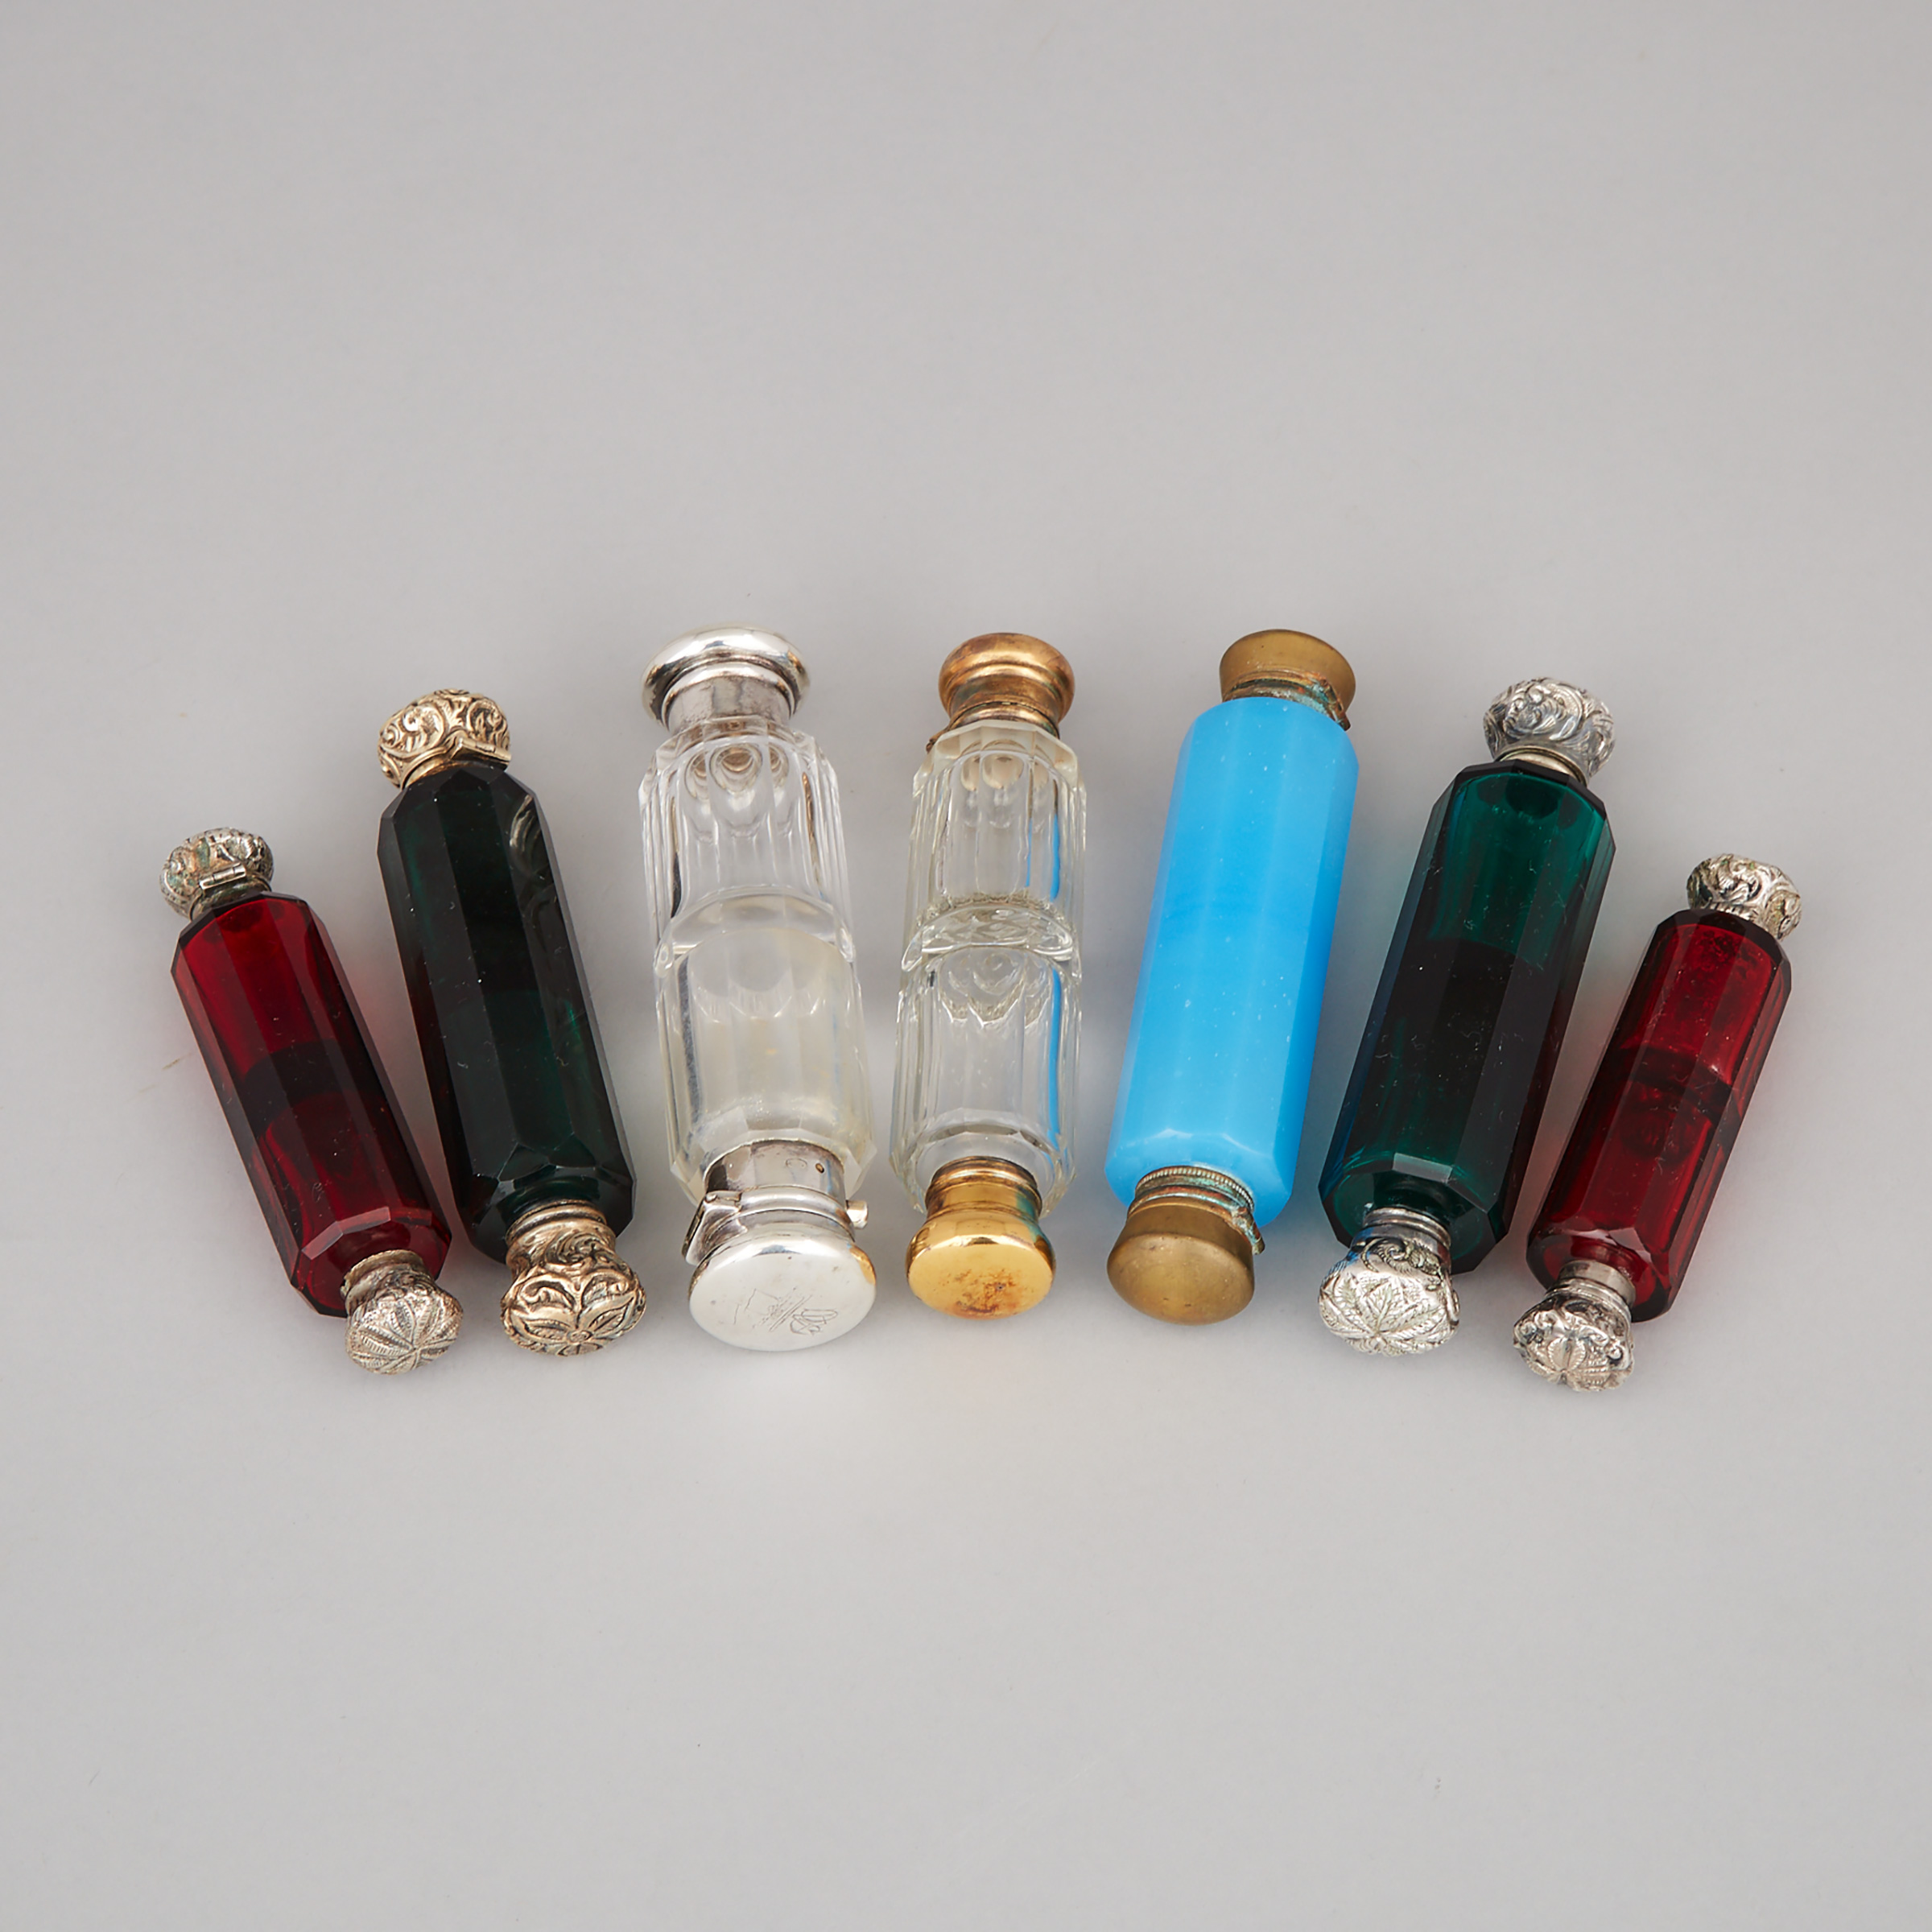 Seven Silver and Metal Mounted Red, Green, Opaque Blue and Clear Glass Double-Ended Perfume Phials, late 19th century